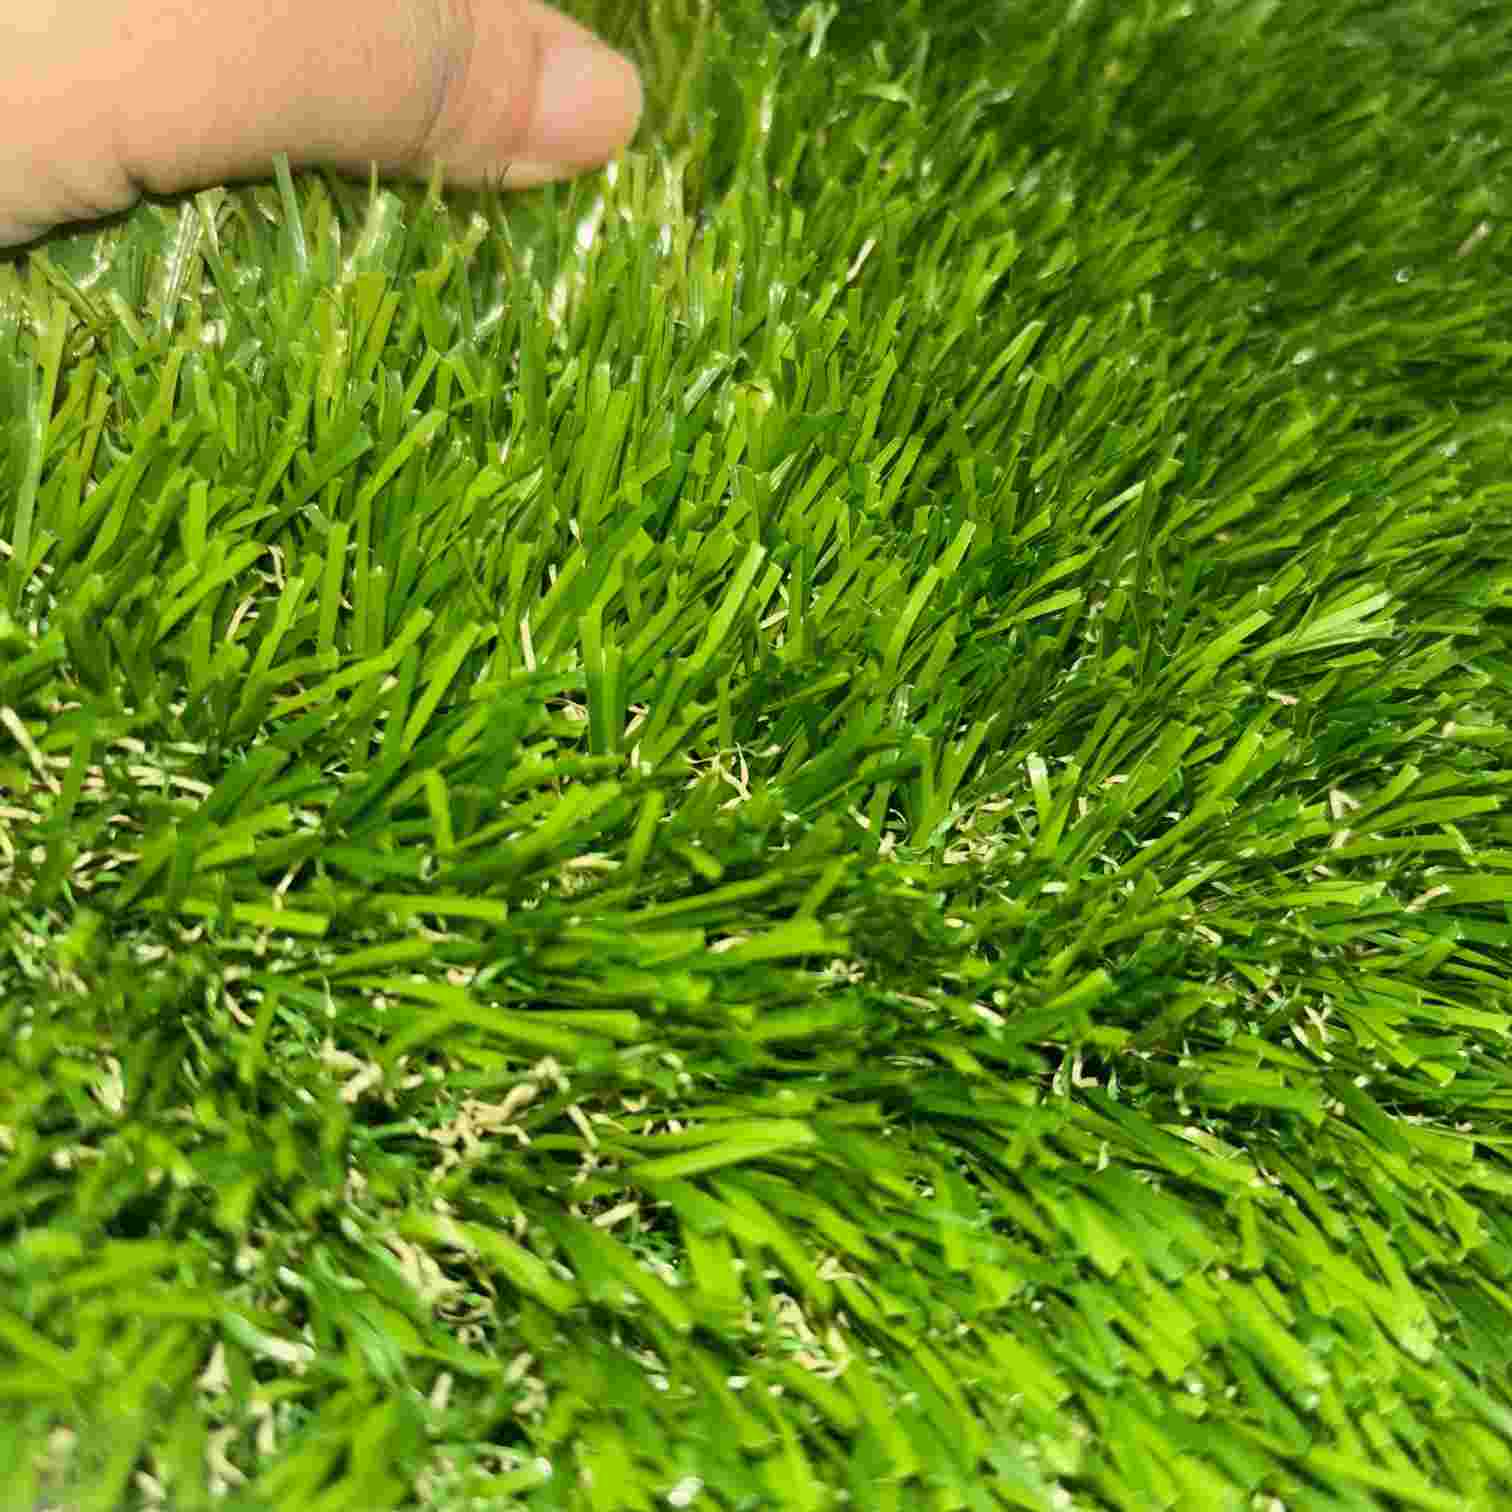 Pet-friendly synthetic turf